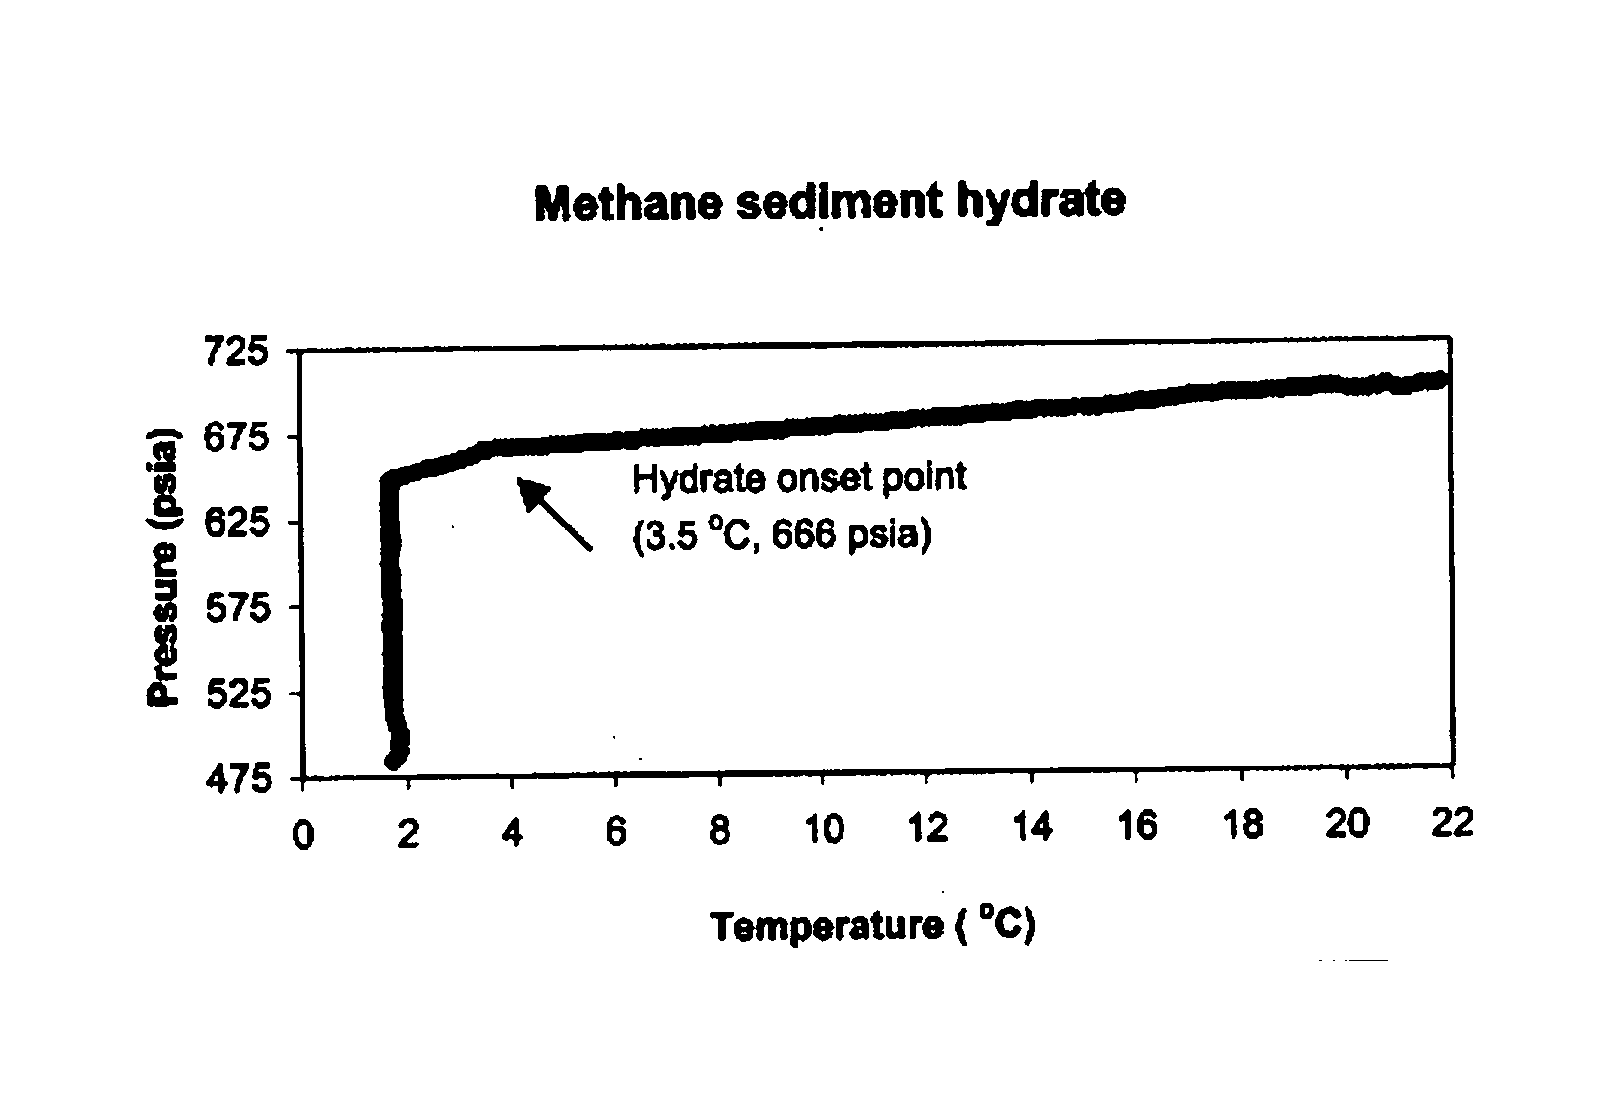 Process to sequester CO2 in natural gas hydrate fields and simultaneously recover methane